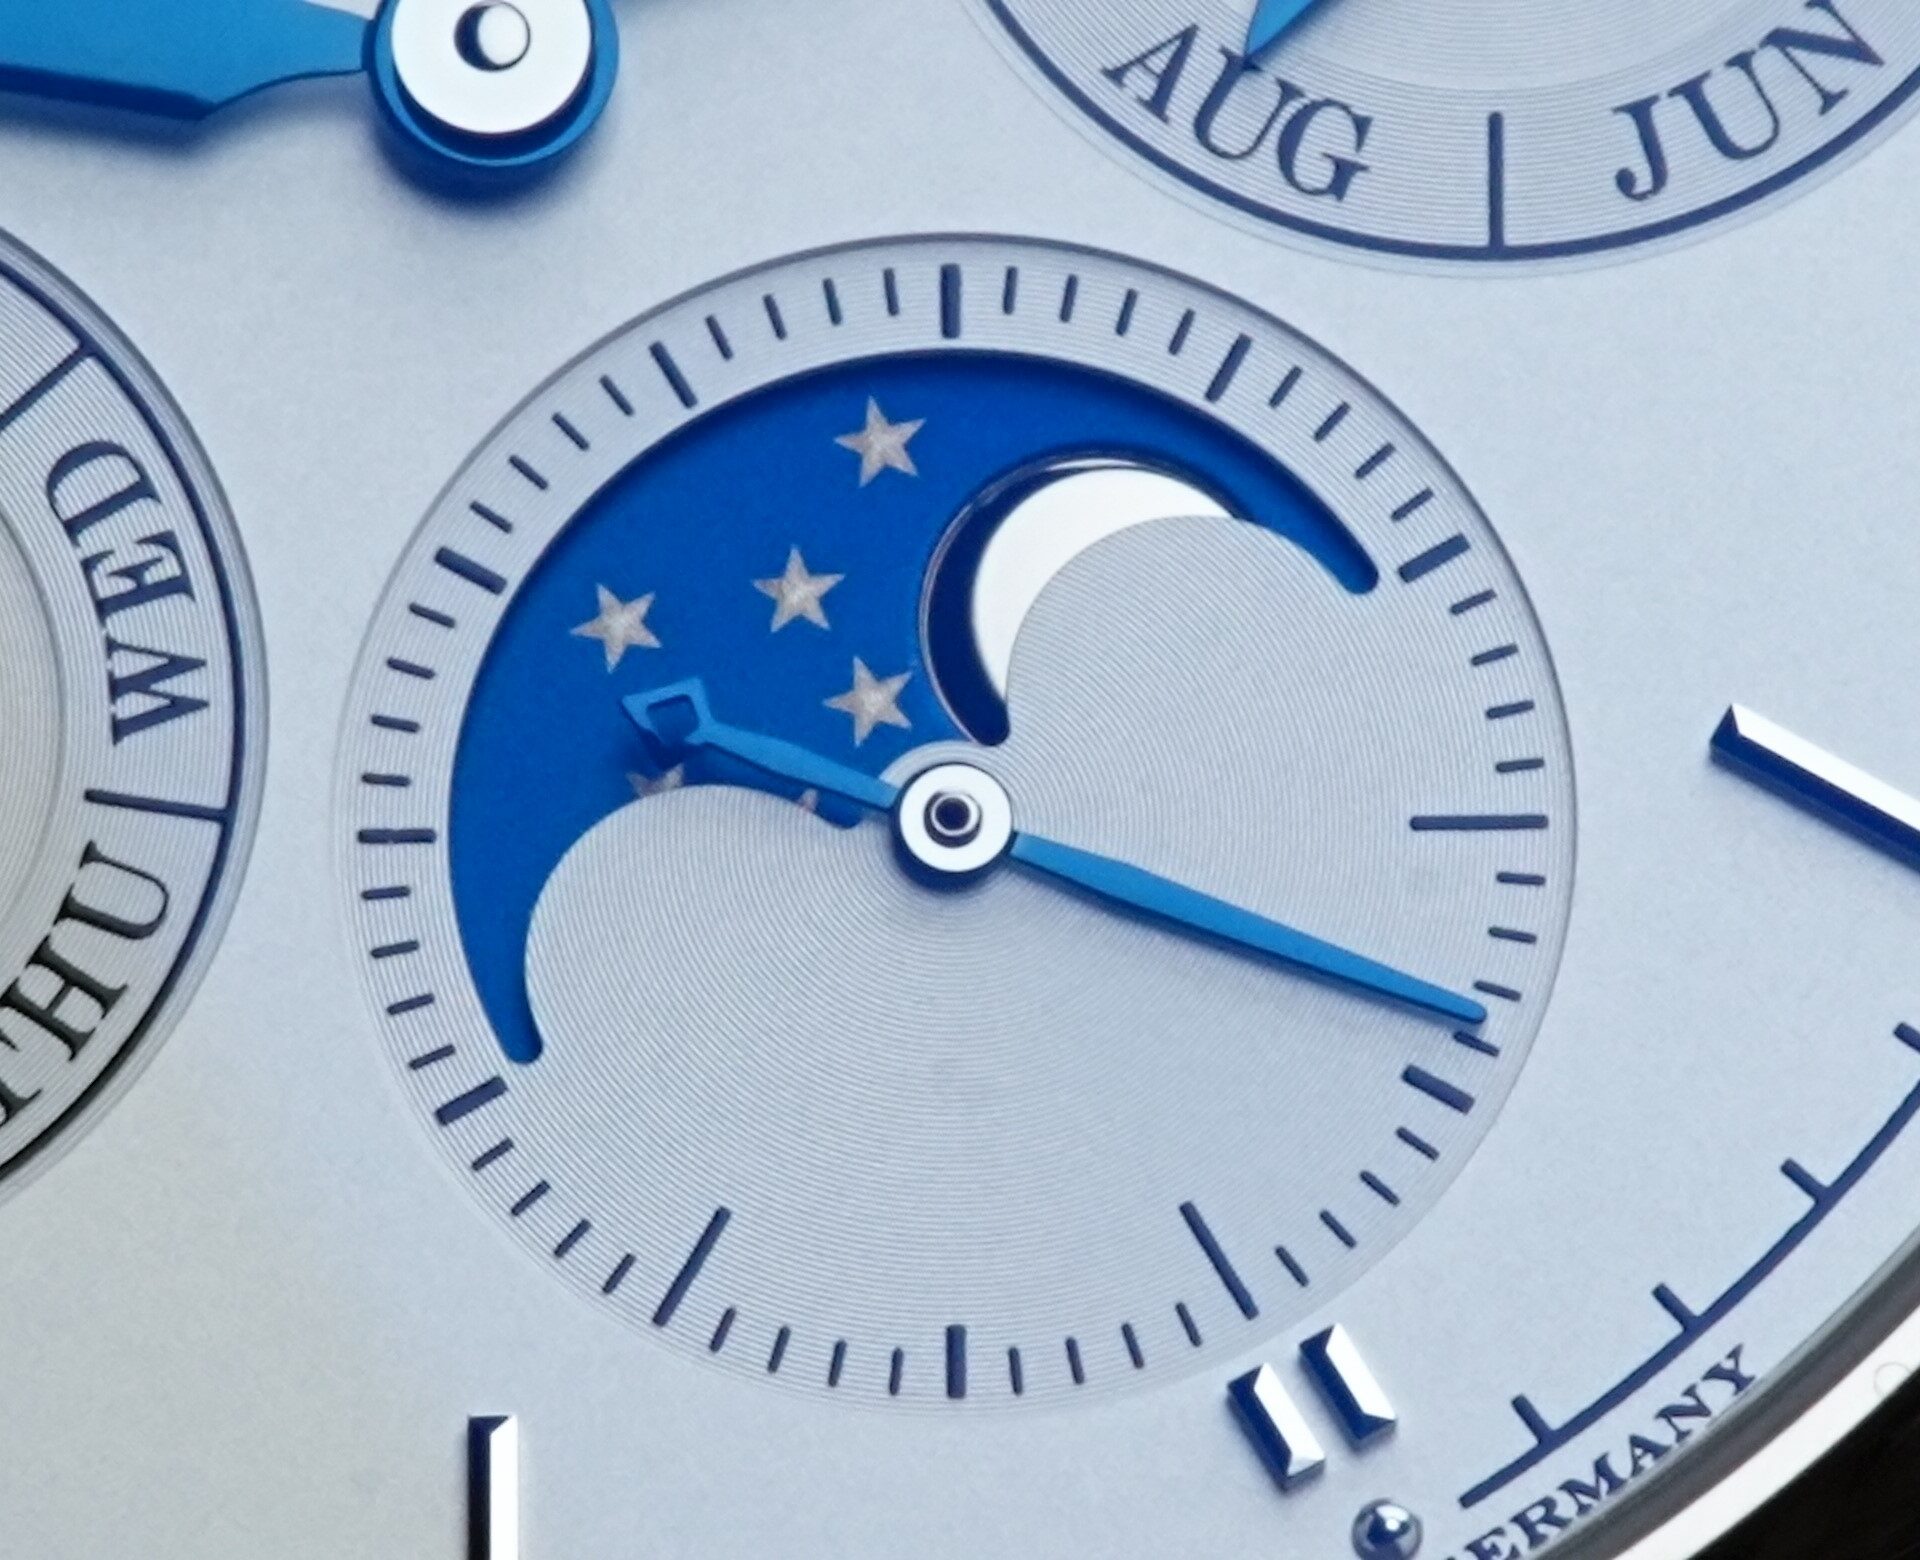 Zoomed in image of the moonphase on the dial of the A. Lange & Söhne Saxonia Annual Calendar watch.